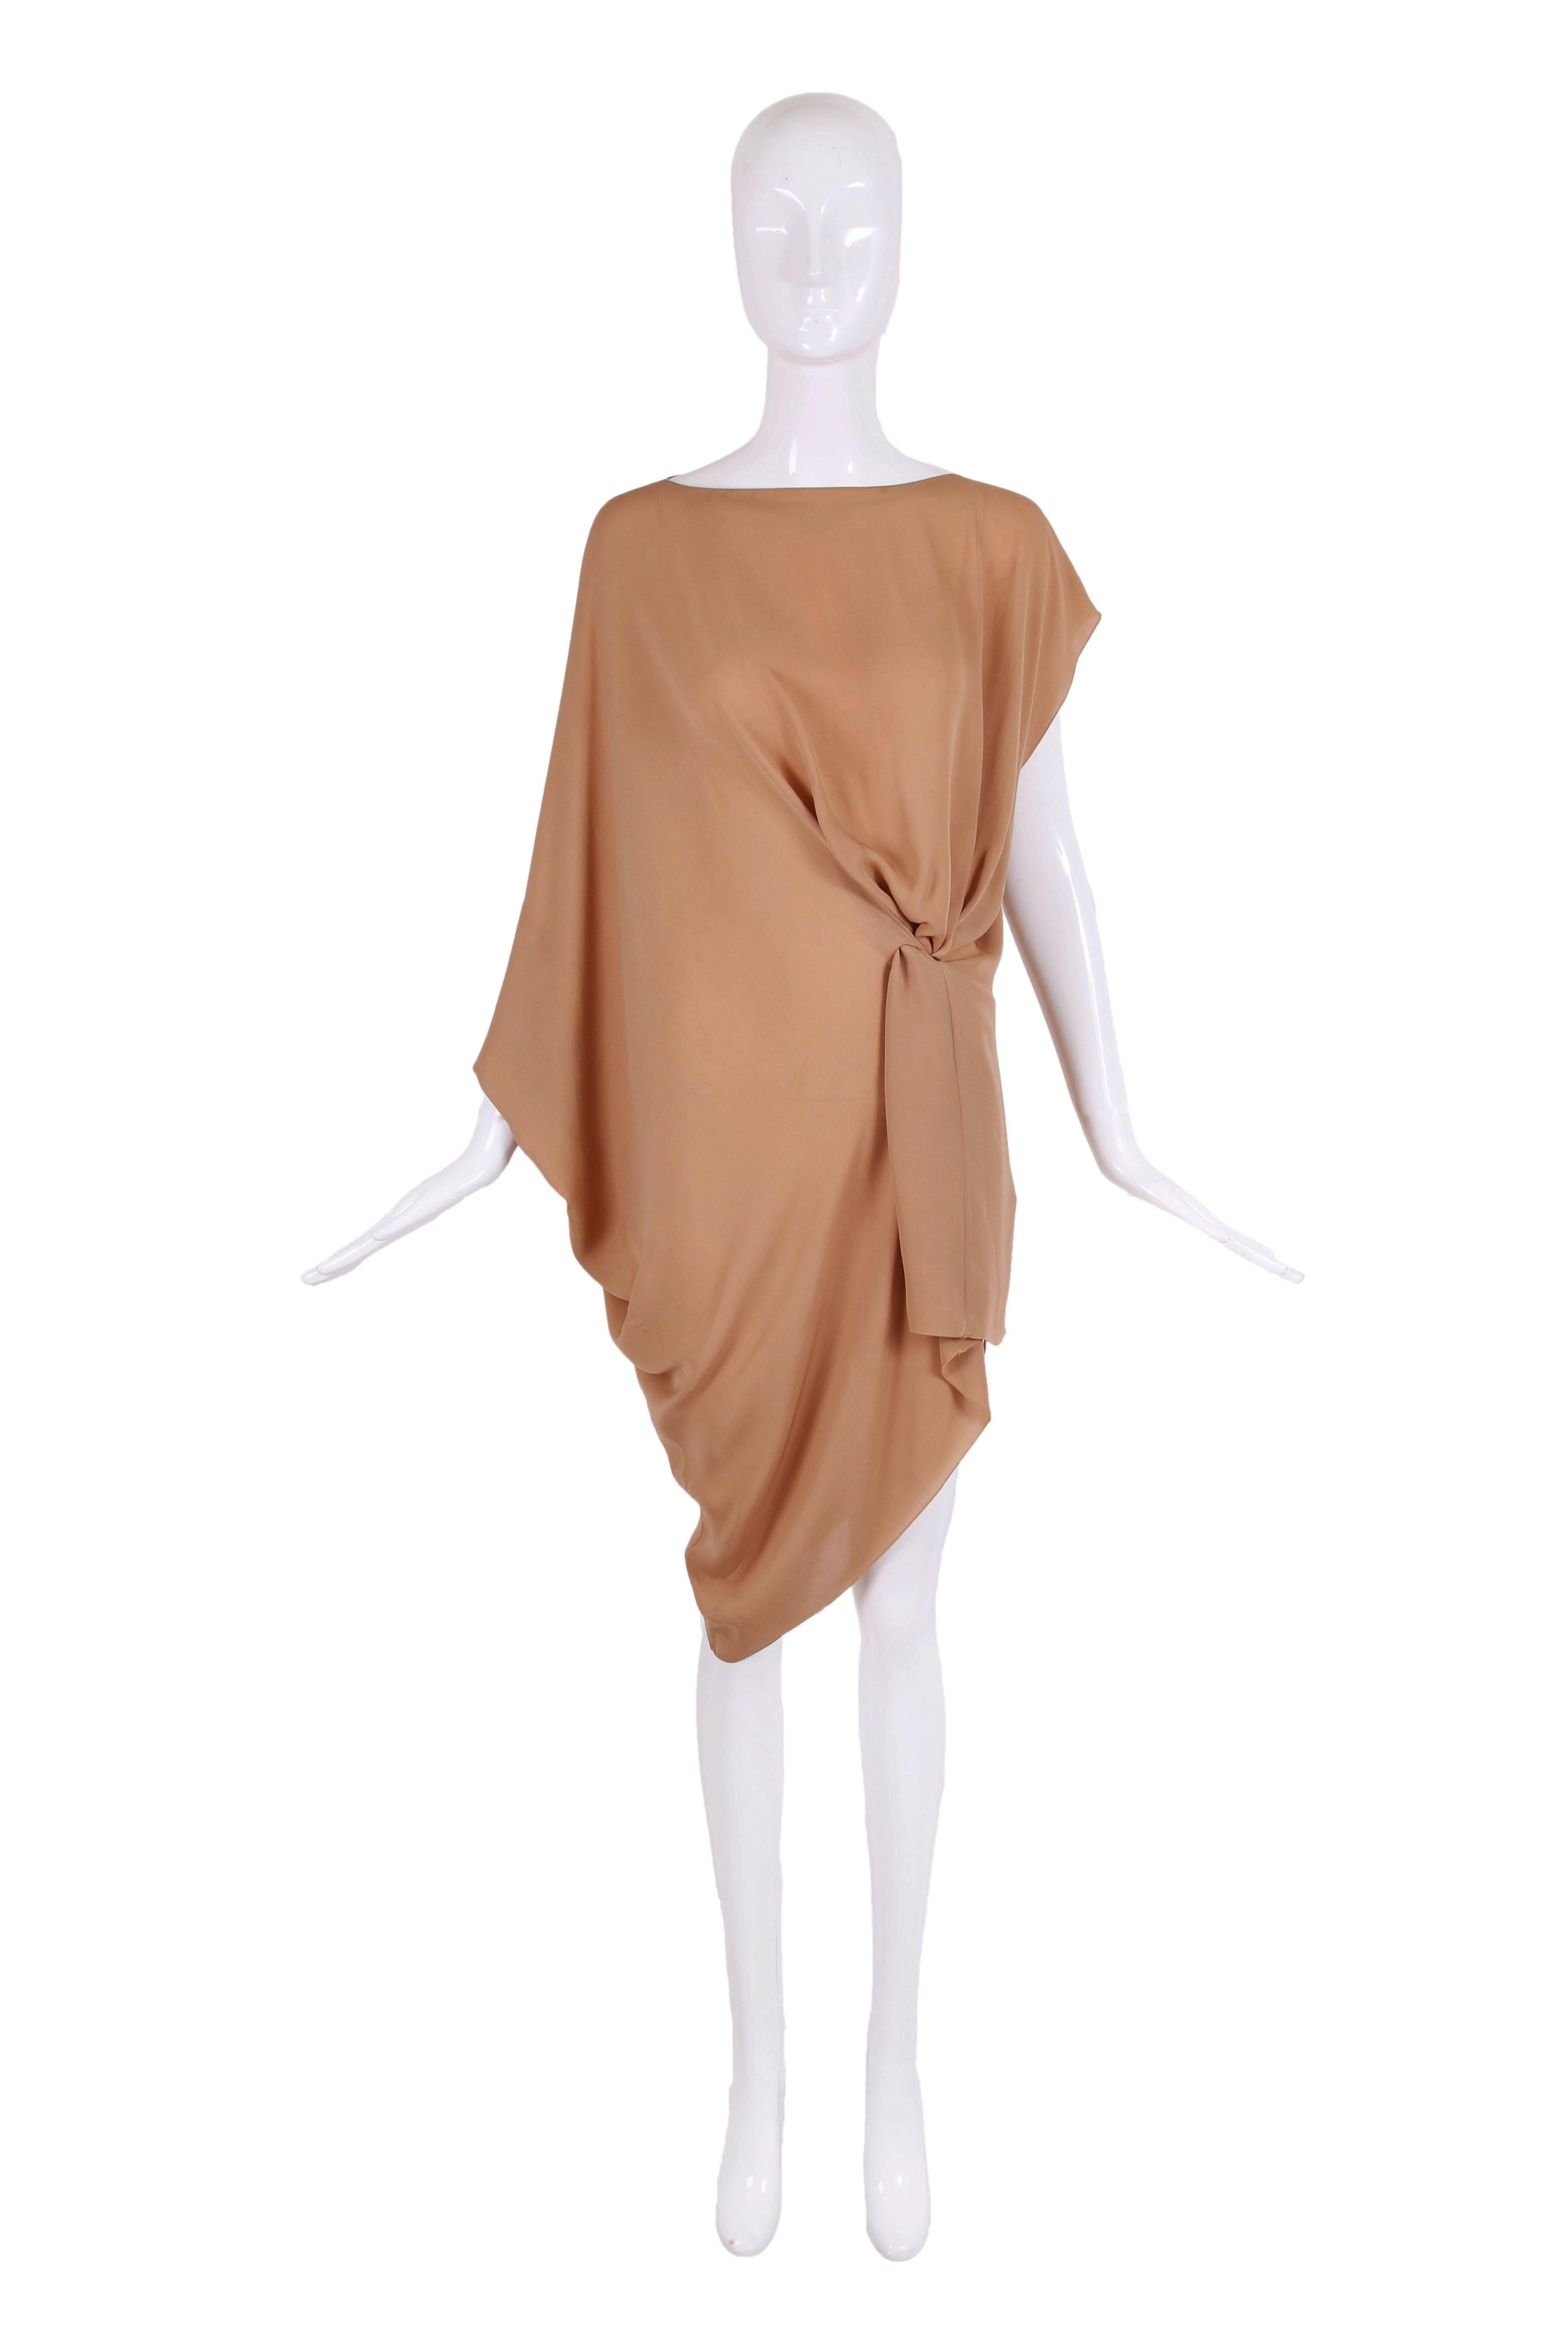 Margiela 100% silk nude-colored single shoulder dress or tunic top. Size 42 - in excellent condition.

MEASUREMENTS:
Waist - 34